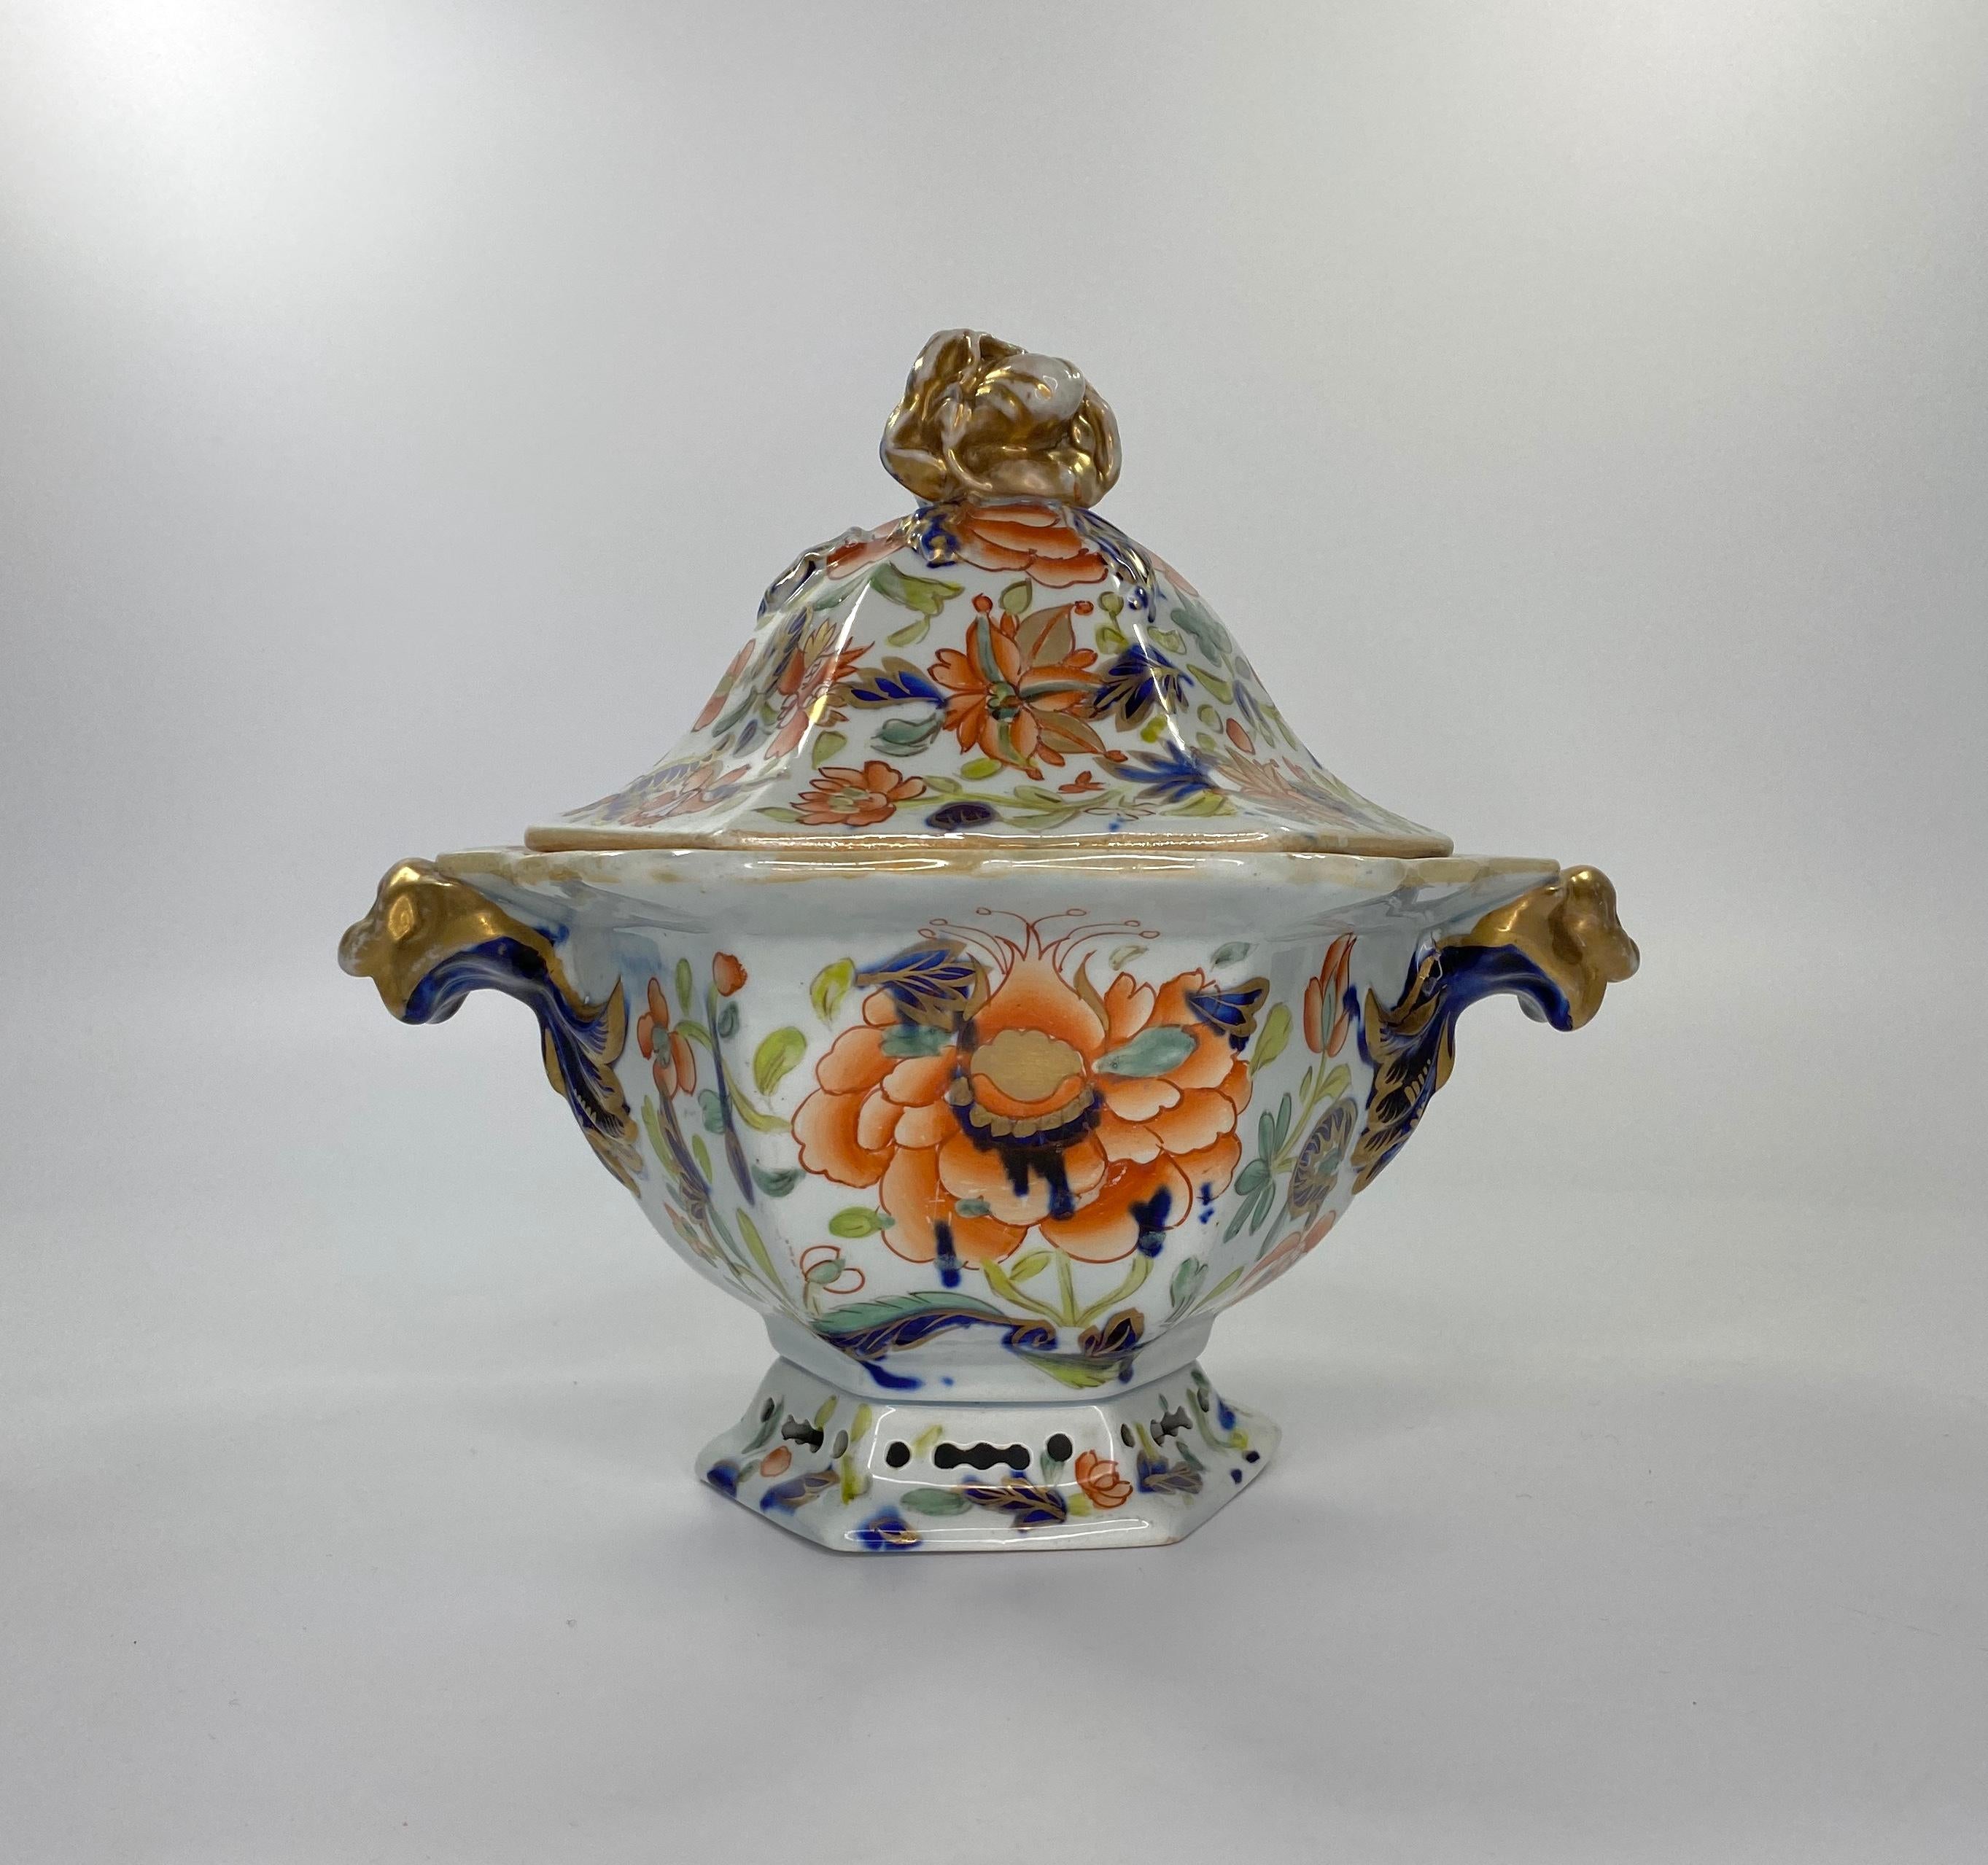 Fired Pair of Masons Ironstone Tureens, Covers and Stands, circa 1815